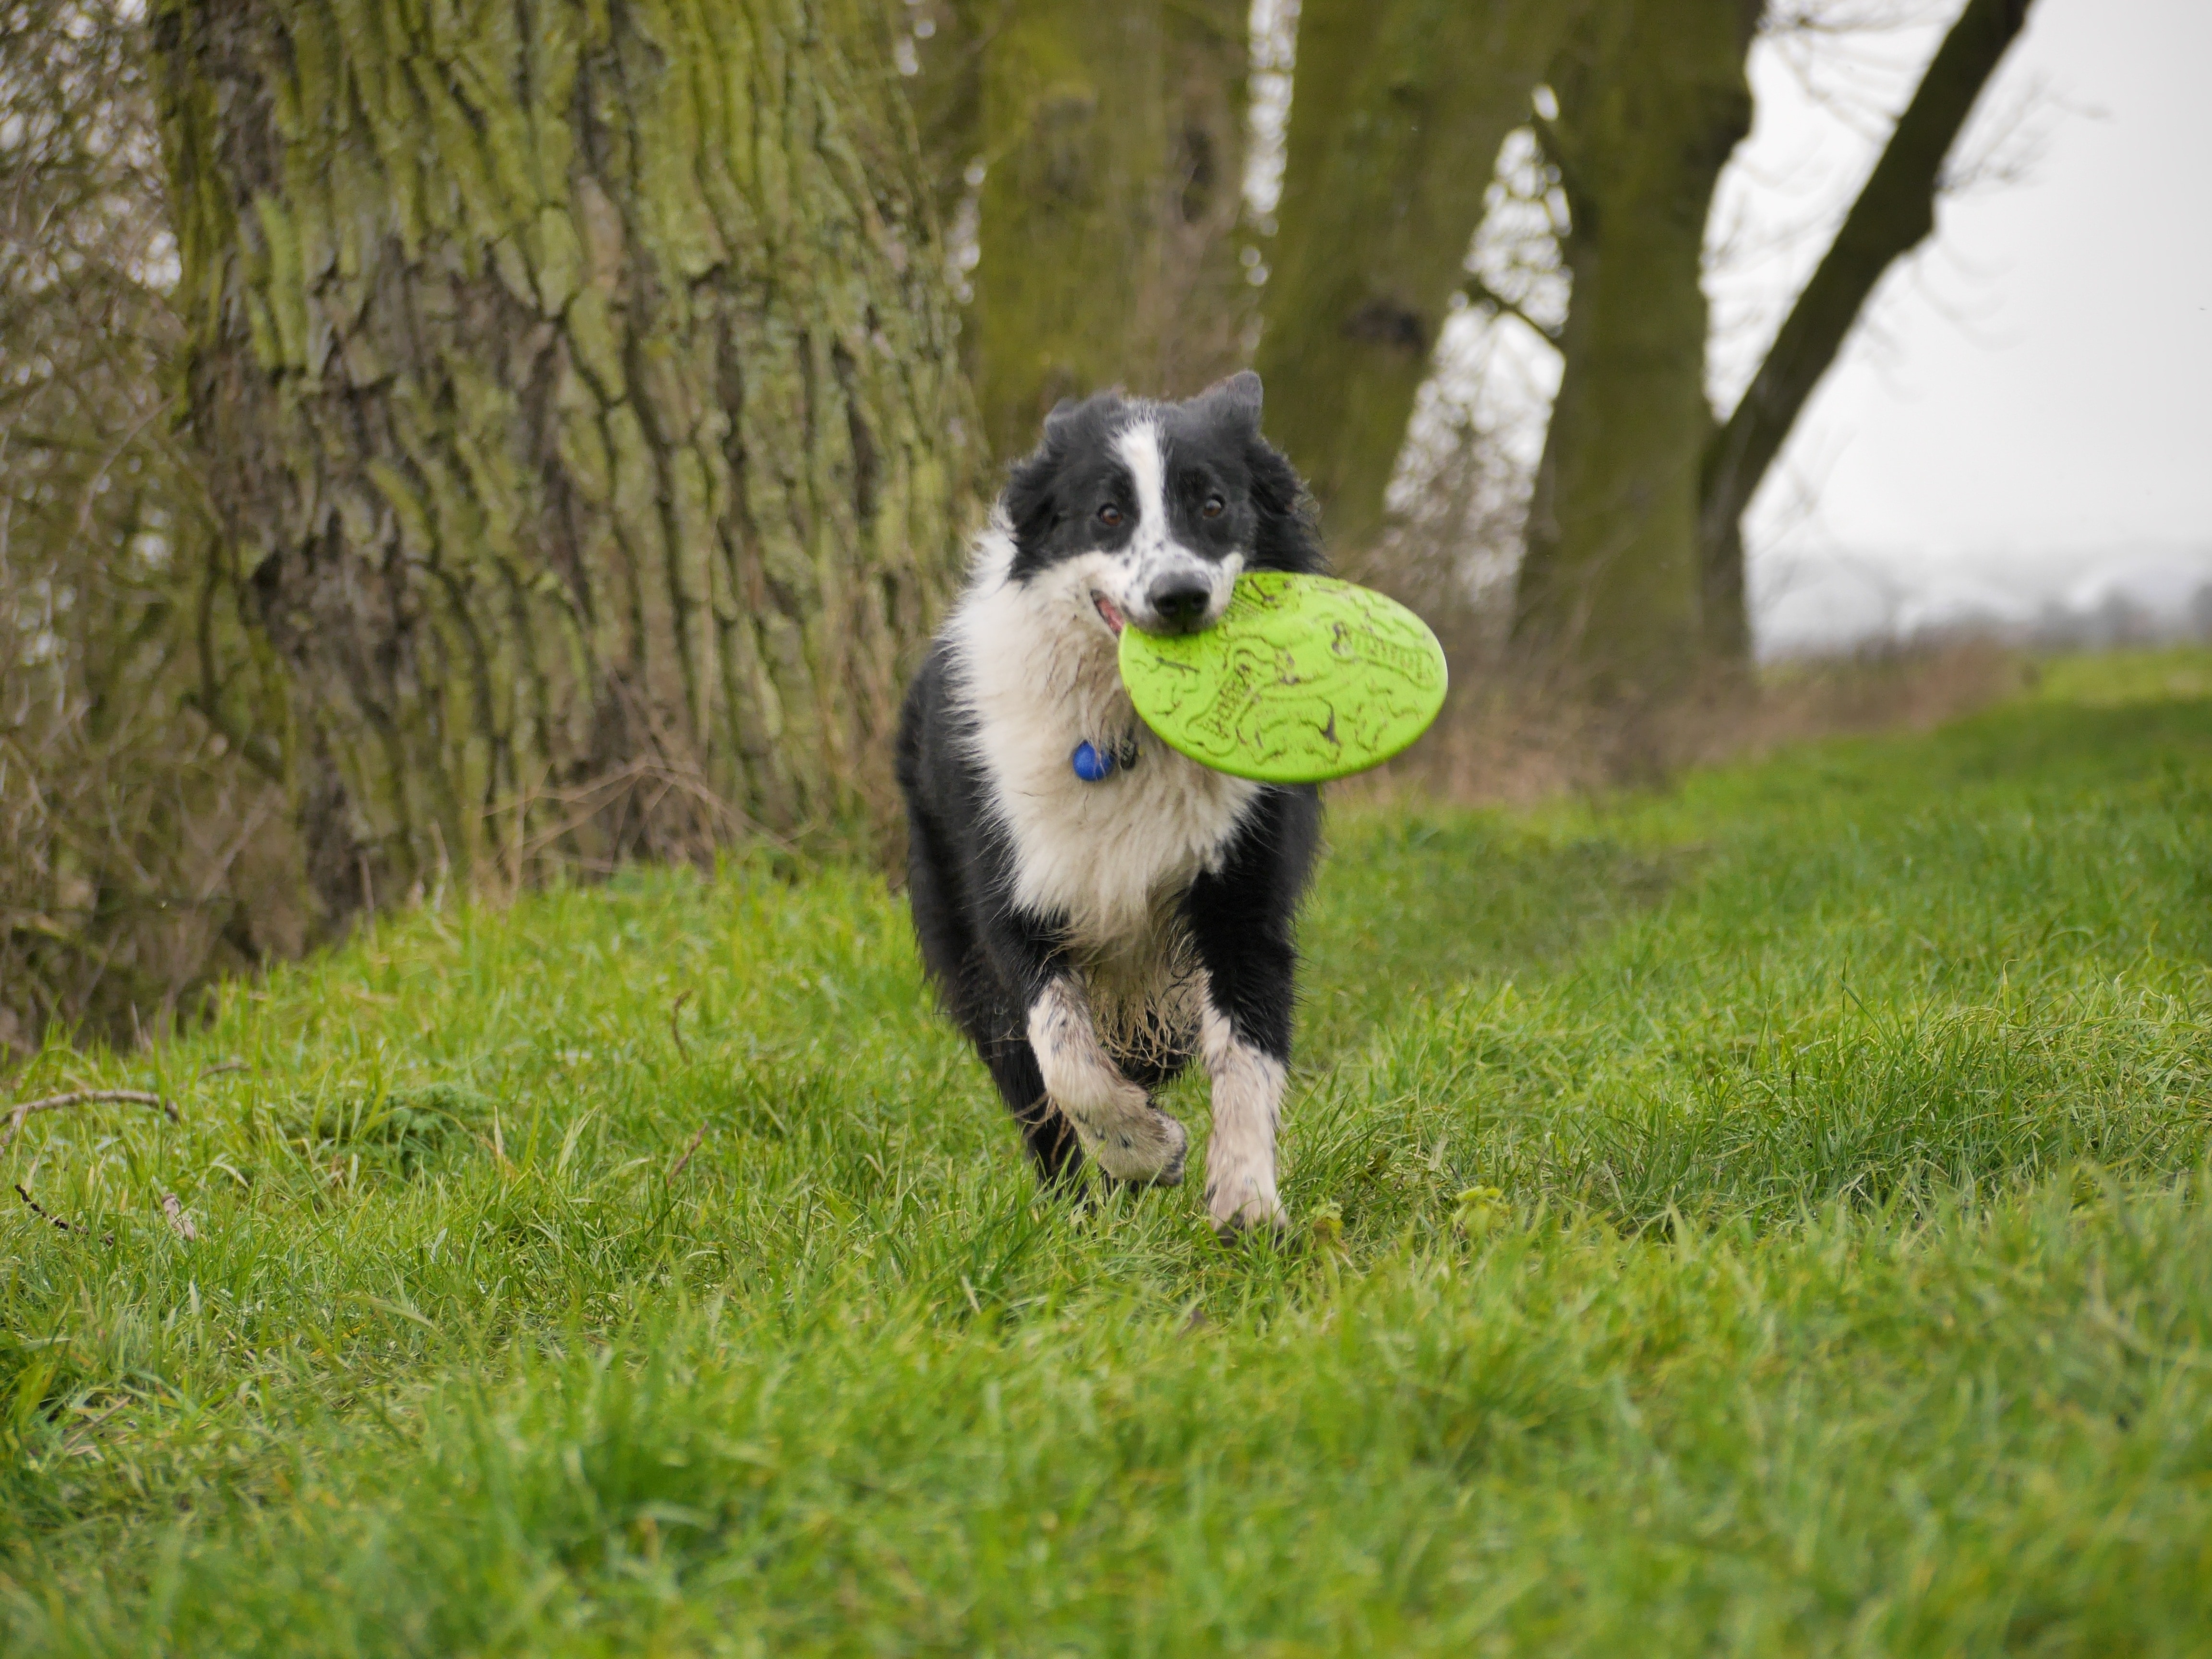 black and white dog biting and flying disc on green grass during day time